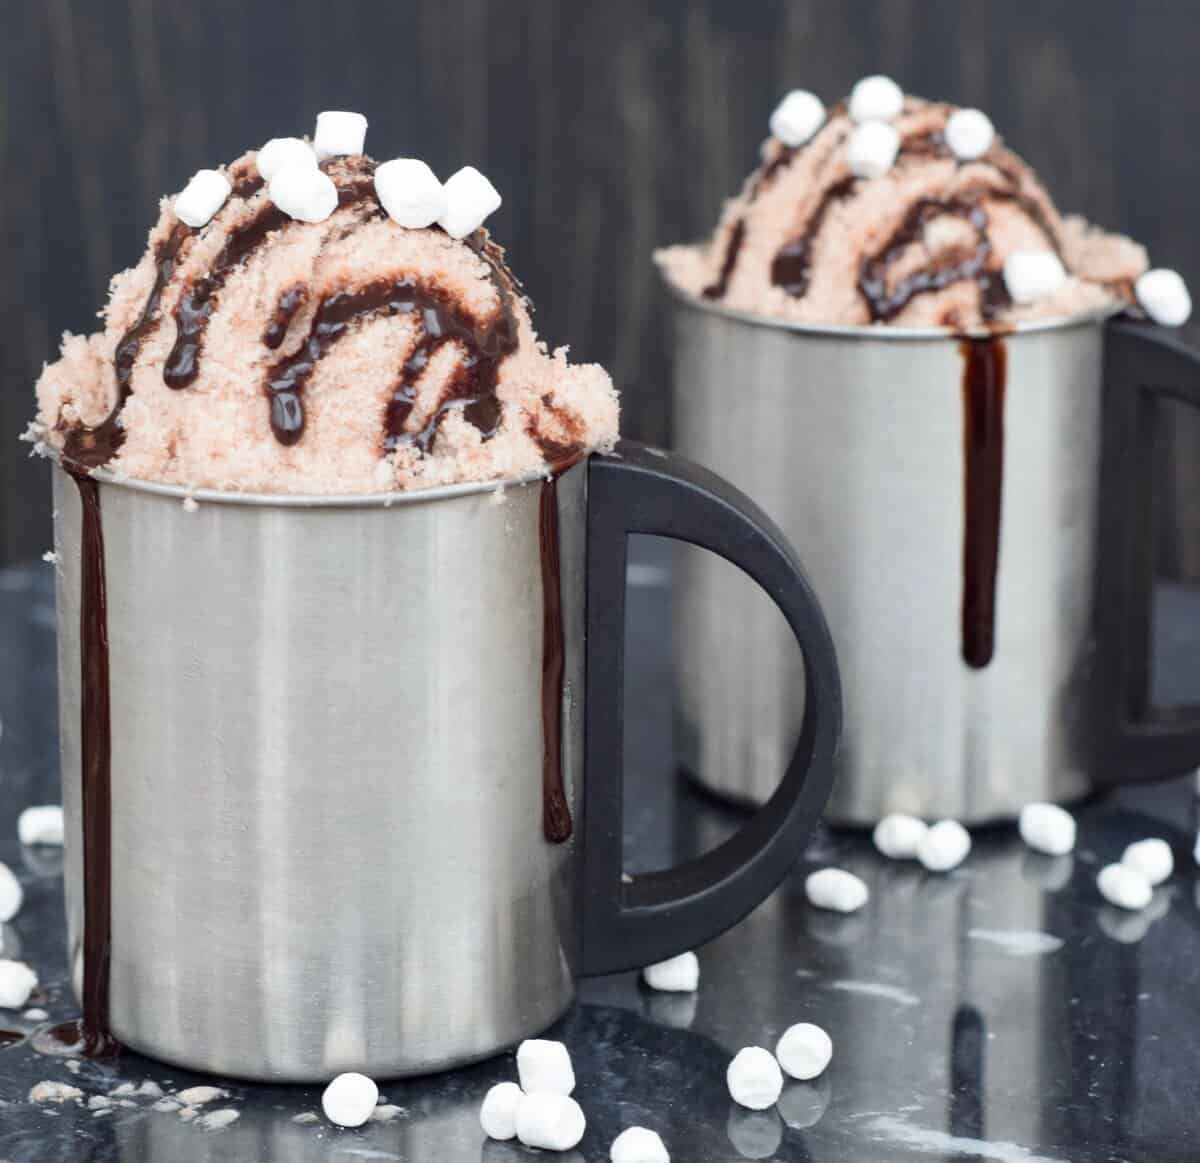 Two silver mugs of chocolate snow cream with chocolate drizzle coming down the sides and marshmallows on the black surface.